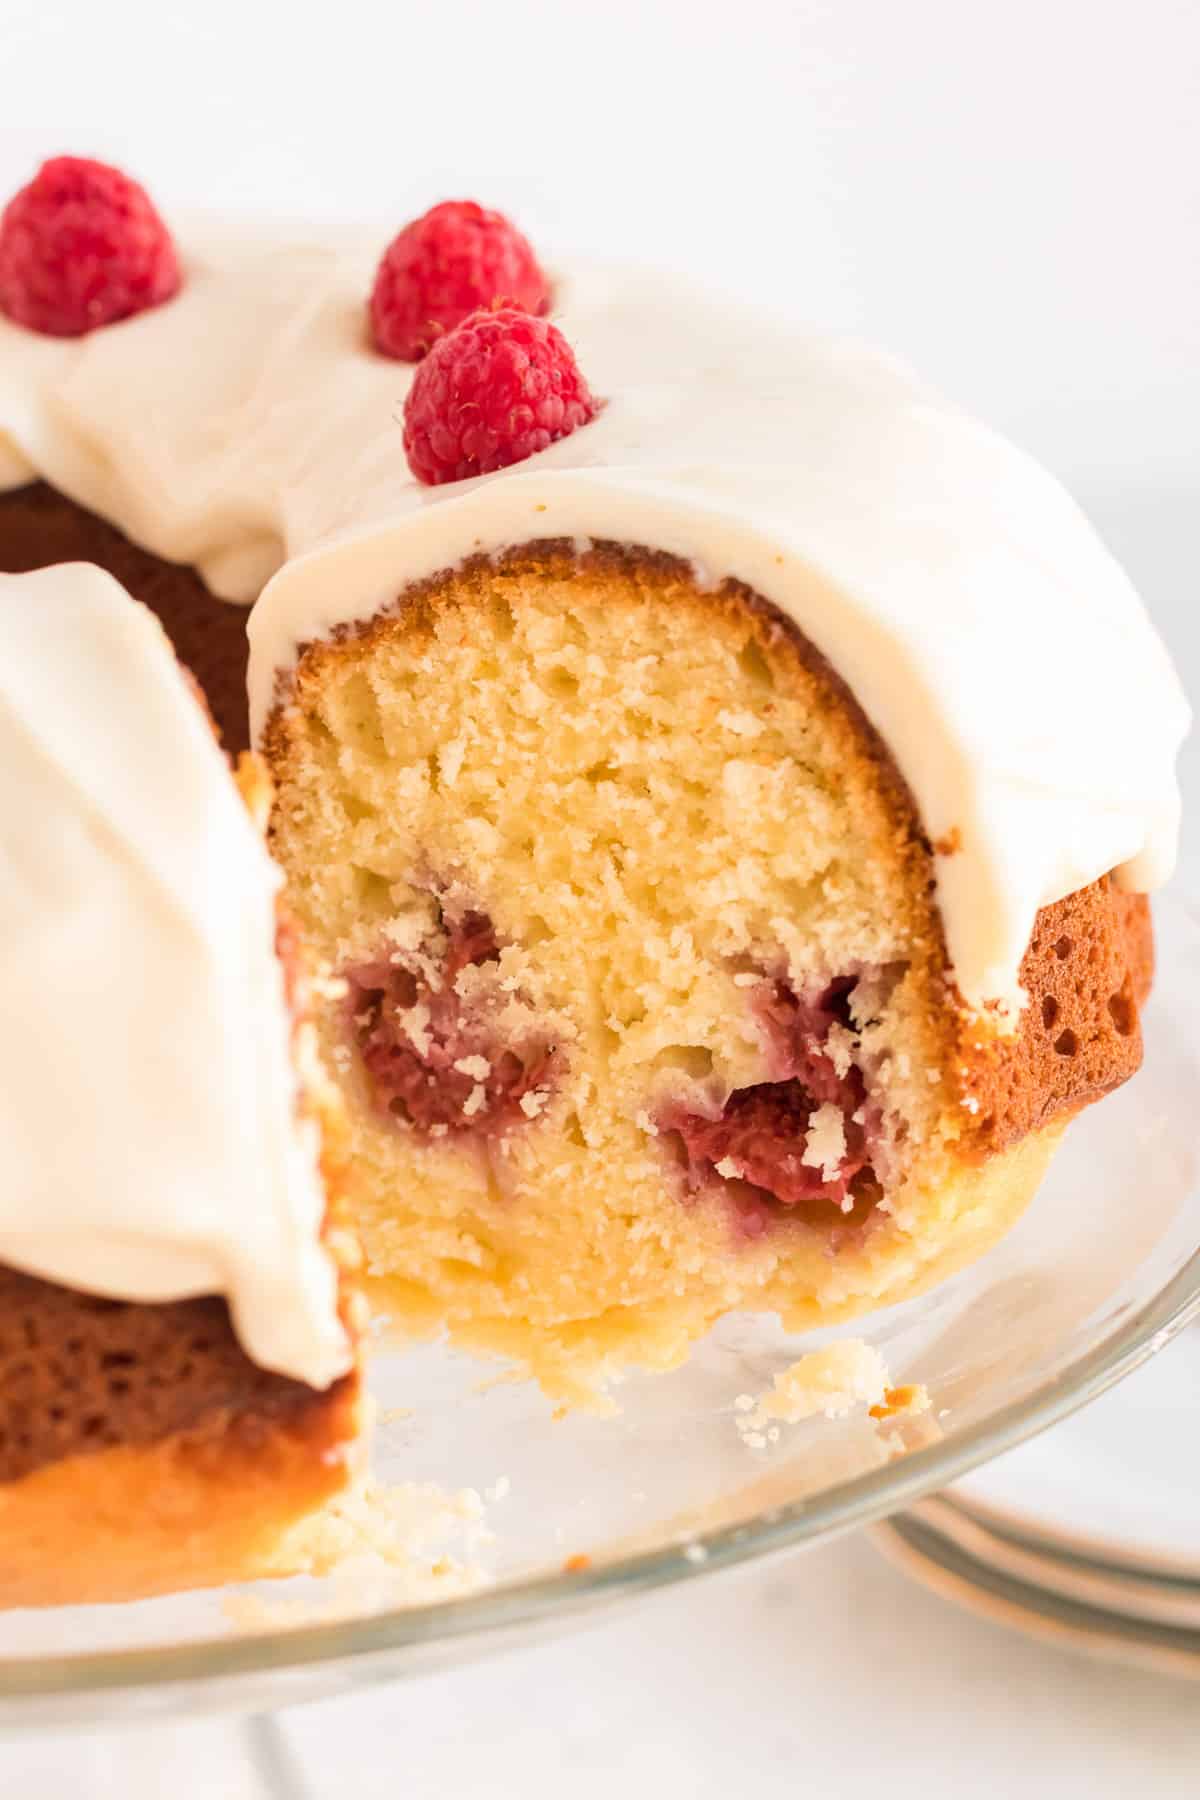 This made from scratch Lemon Raspberry Bundt Cake is a sweet, classic dessert choice